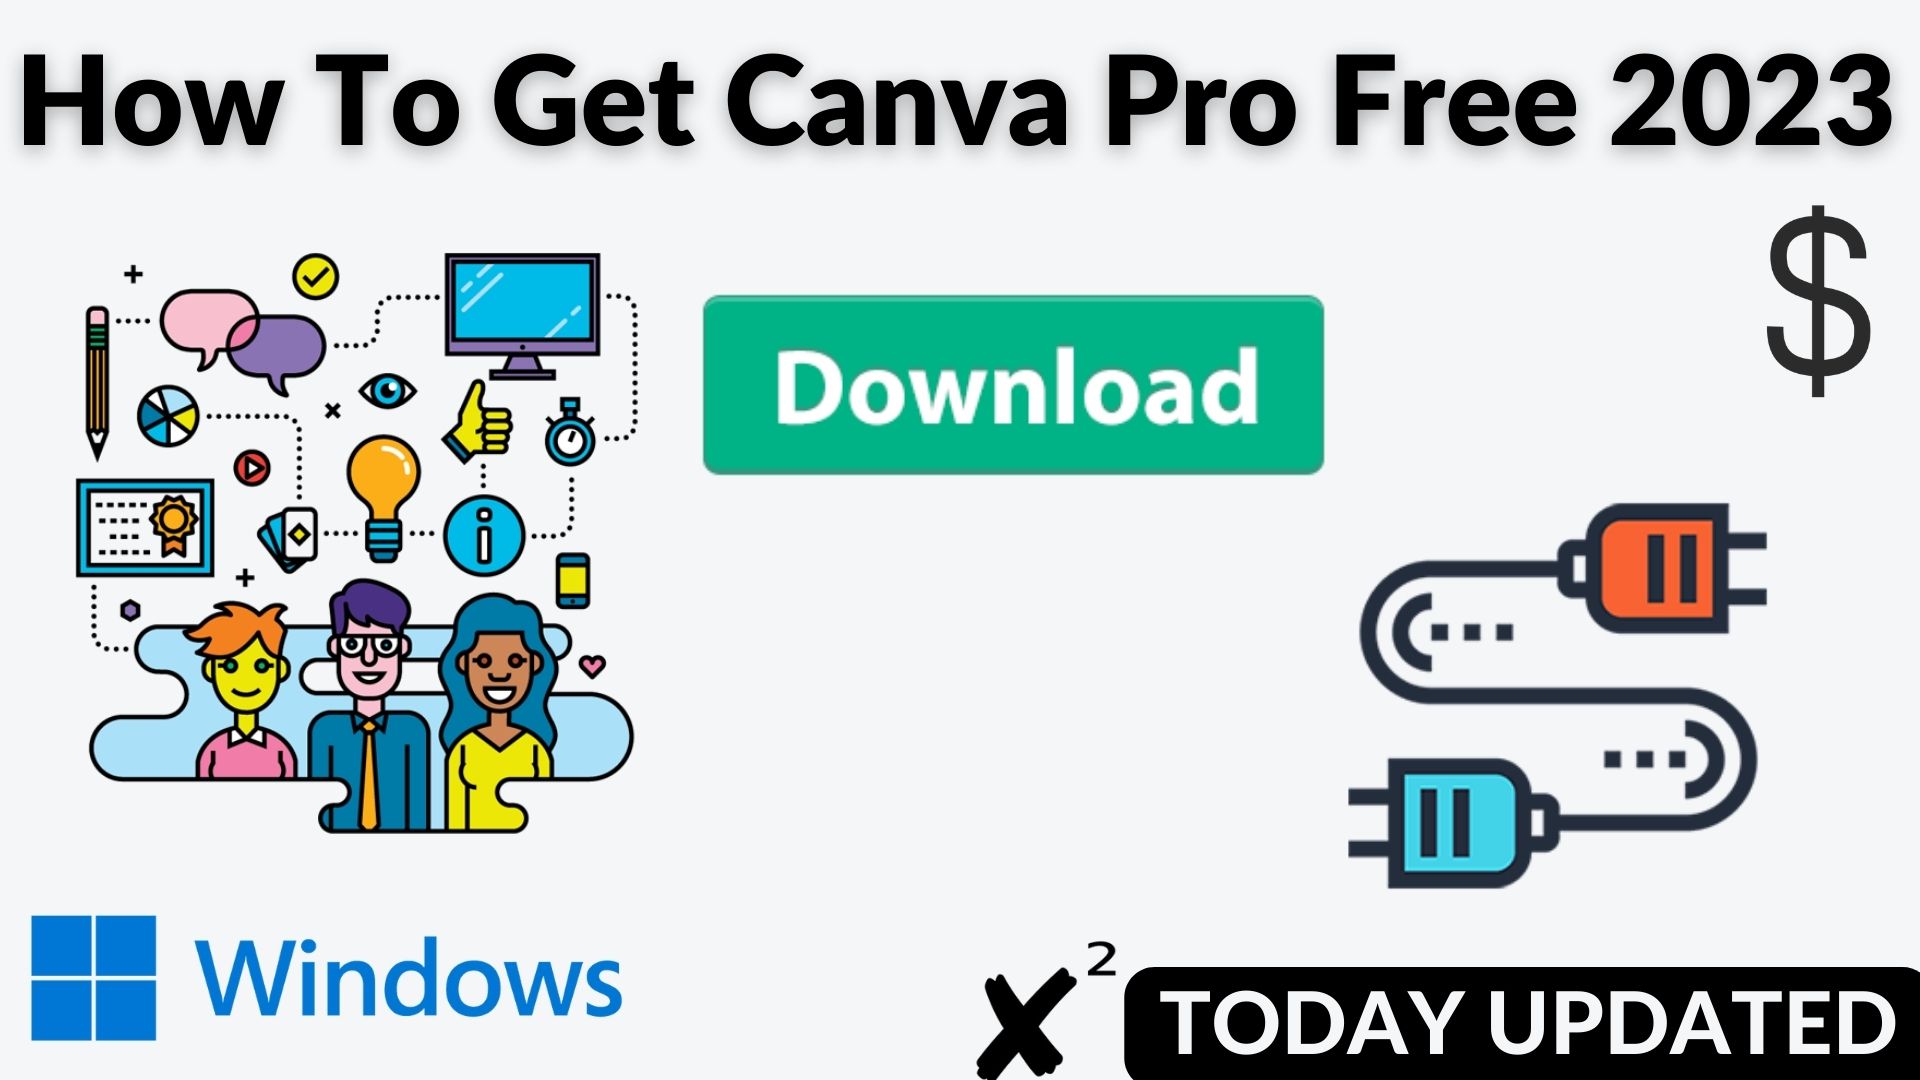 How to get canva pro free 2023